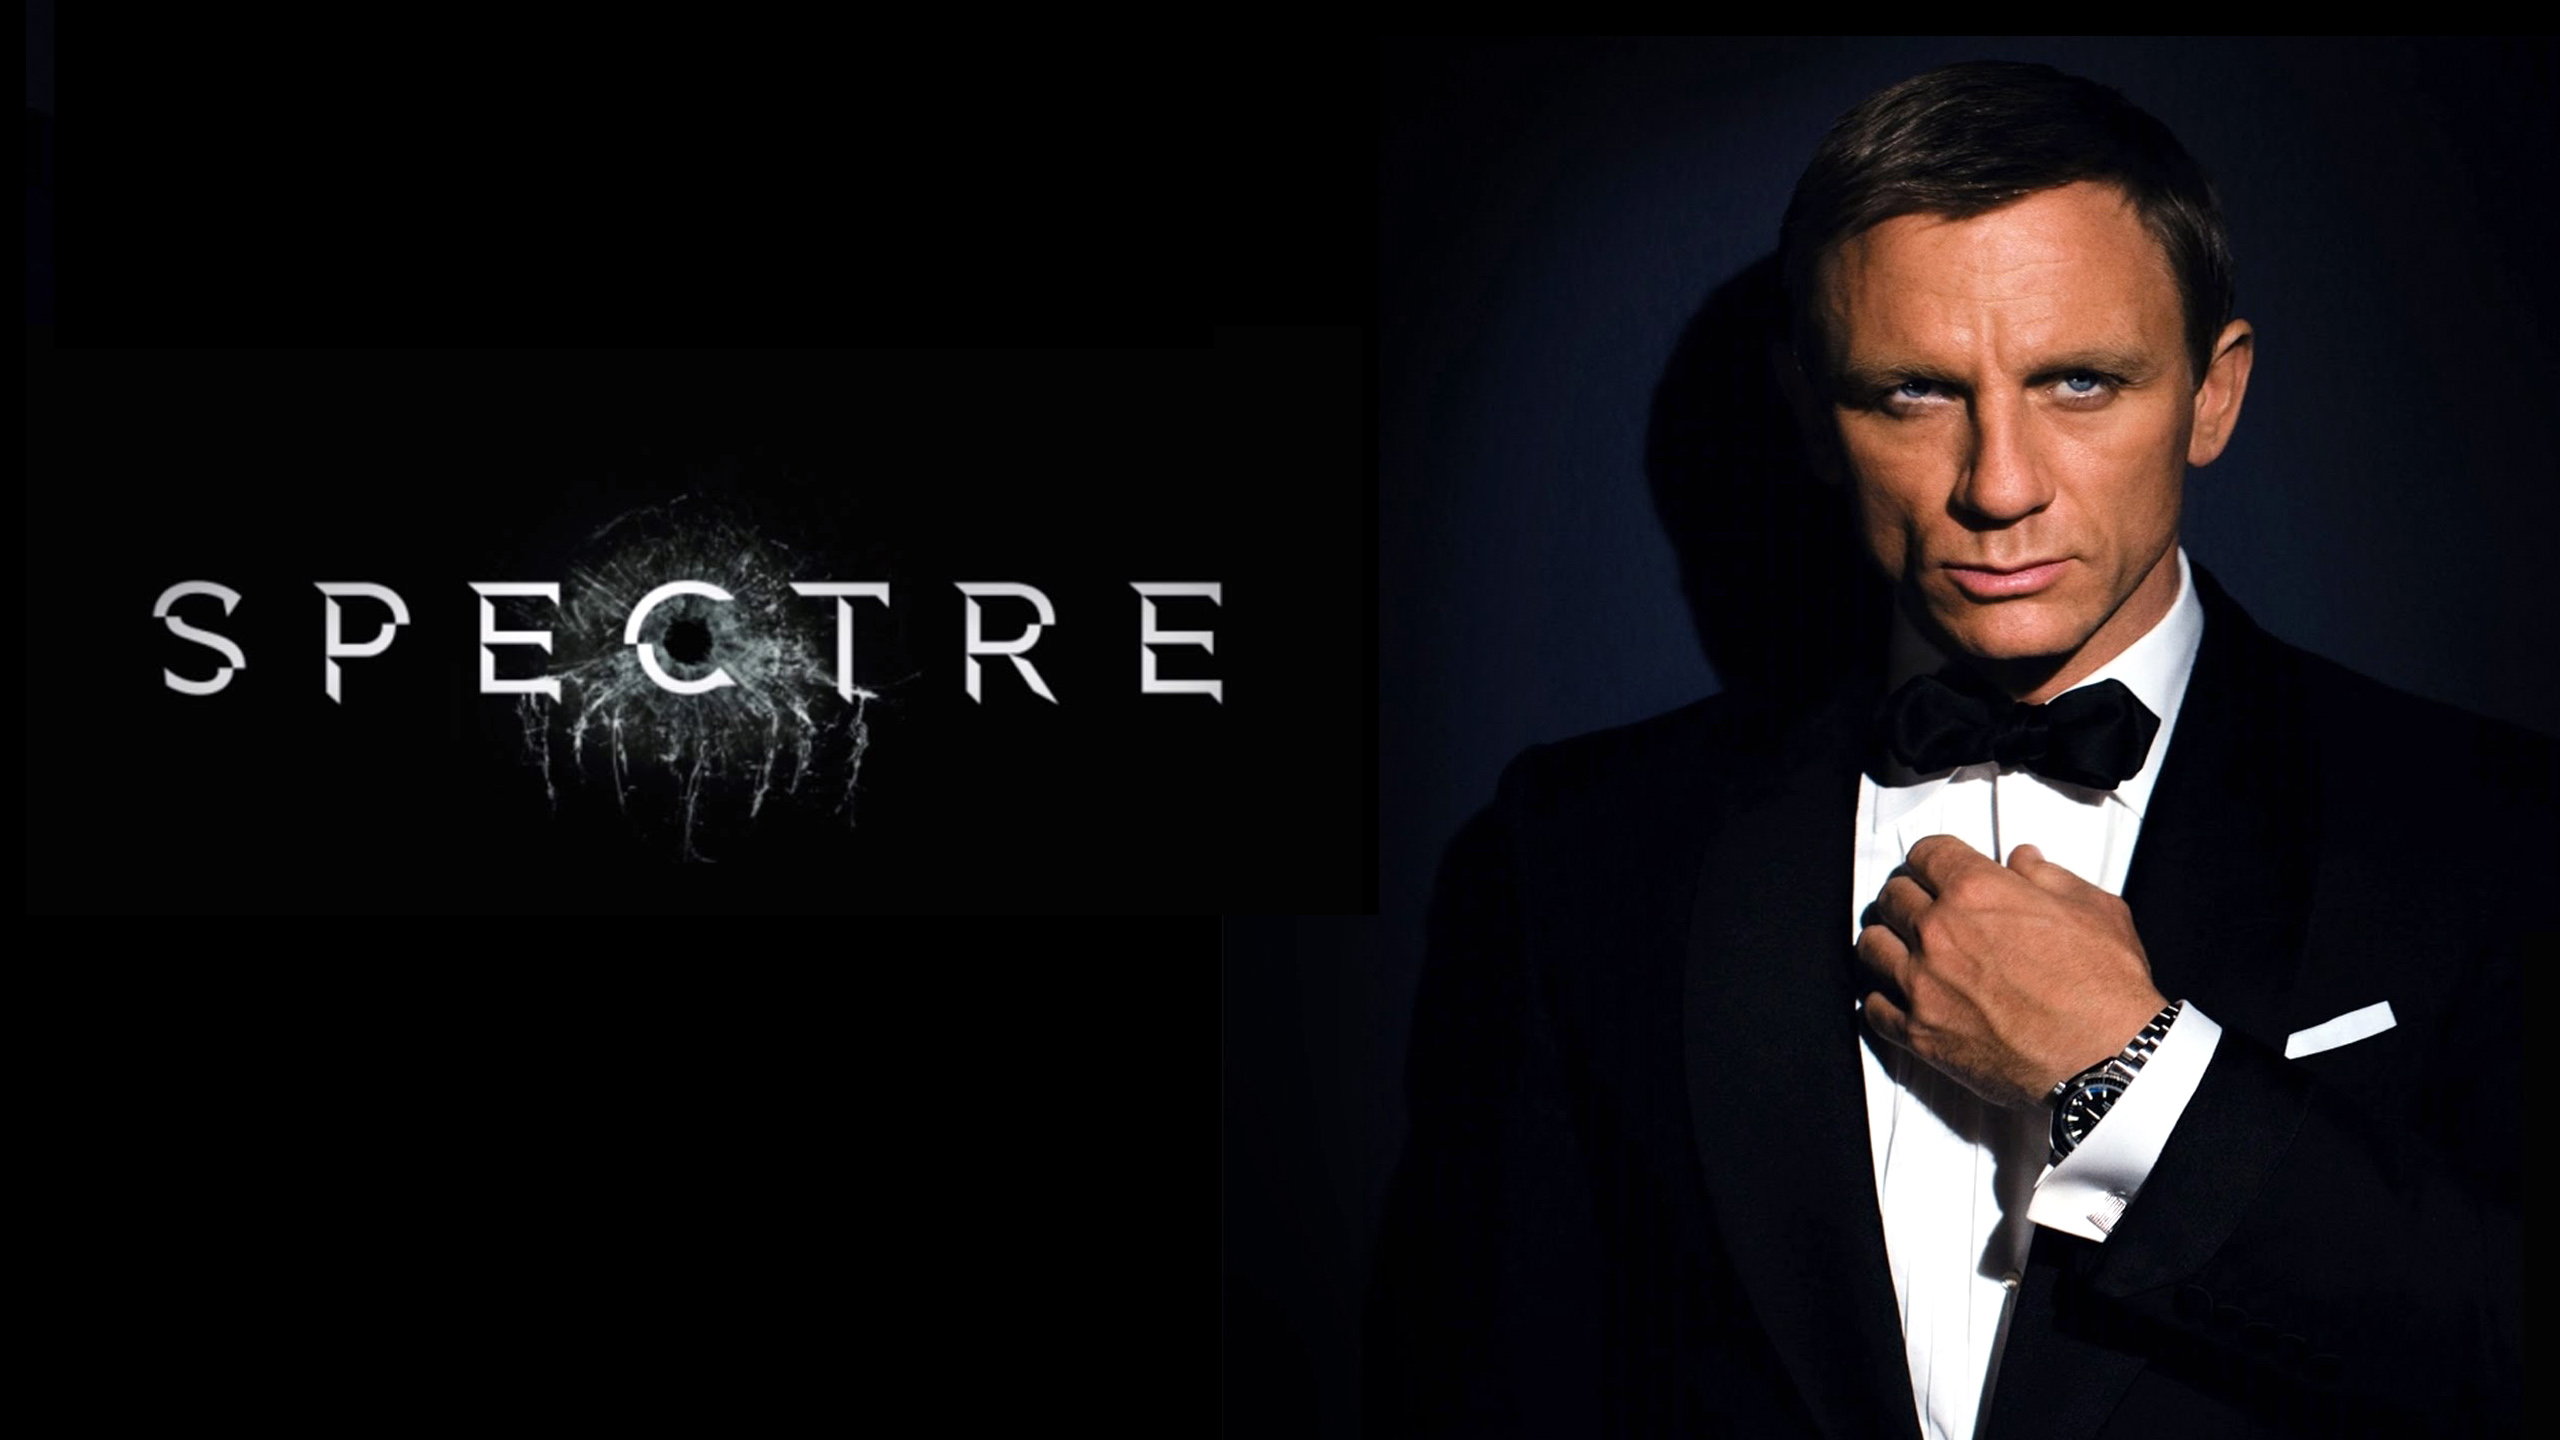 Watch Spectre Movie World Television Premiere On Movies Now 23rd